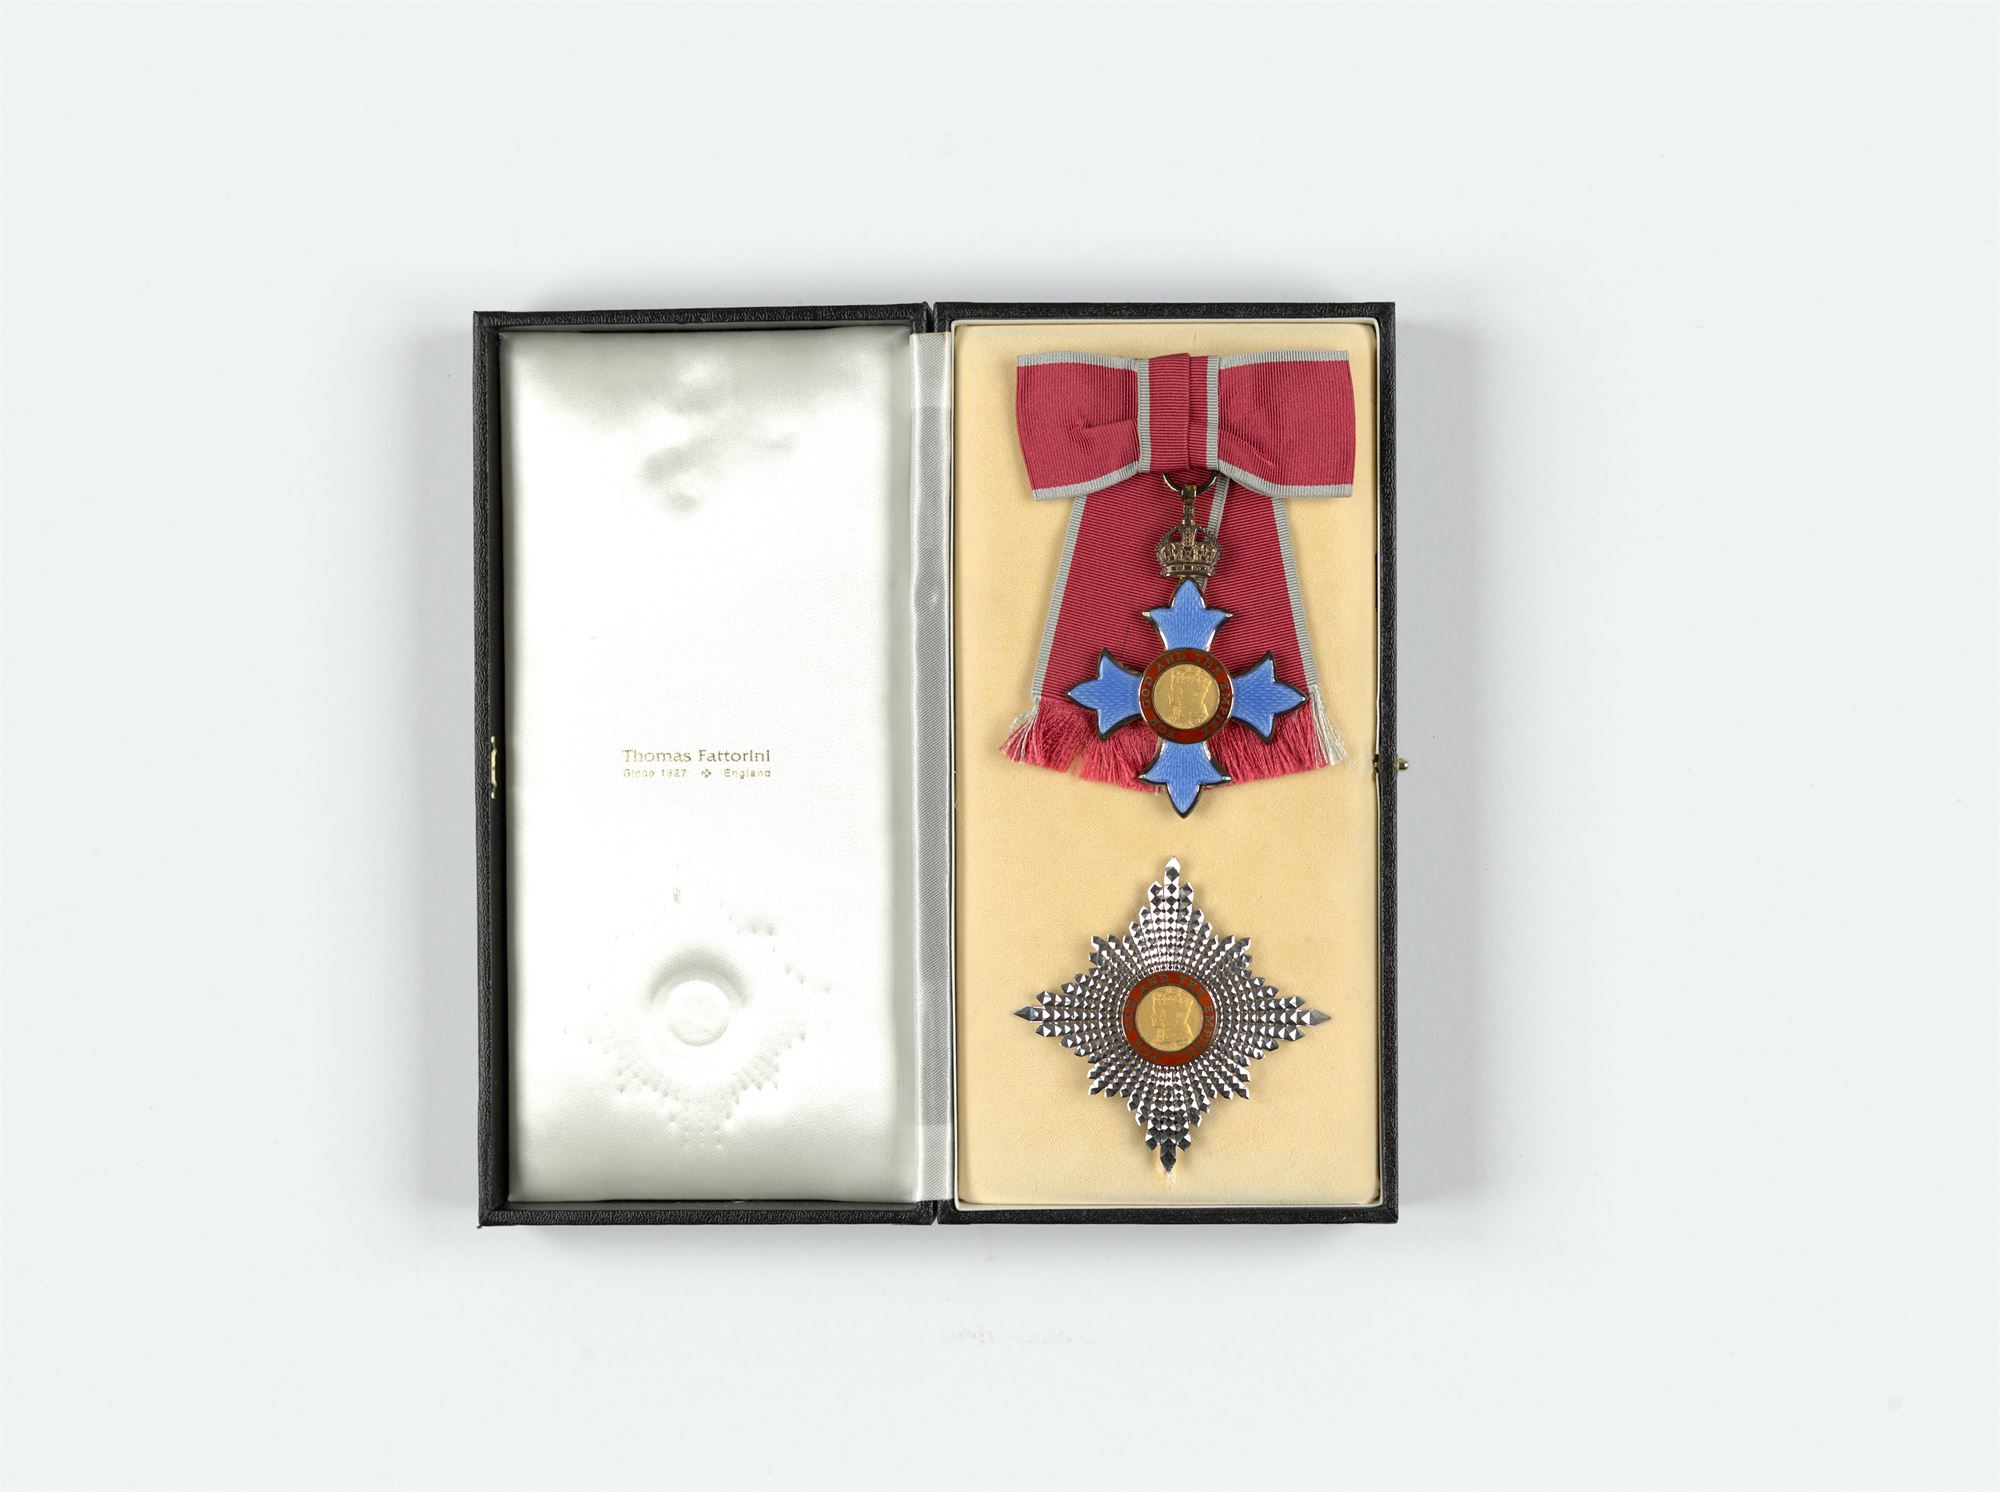 DBE medal in a boz with silk lining. The medal has a red and grey ribbon, a blue star, and a silver star emblem 